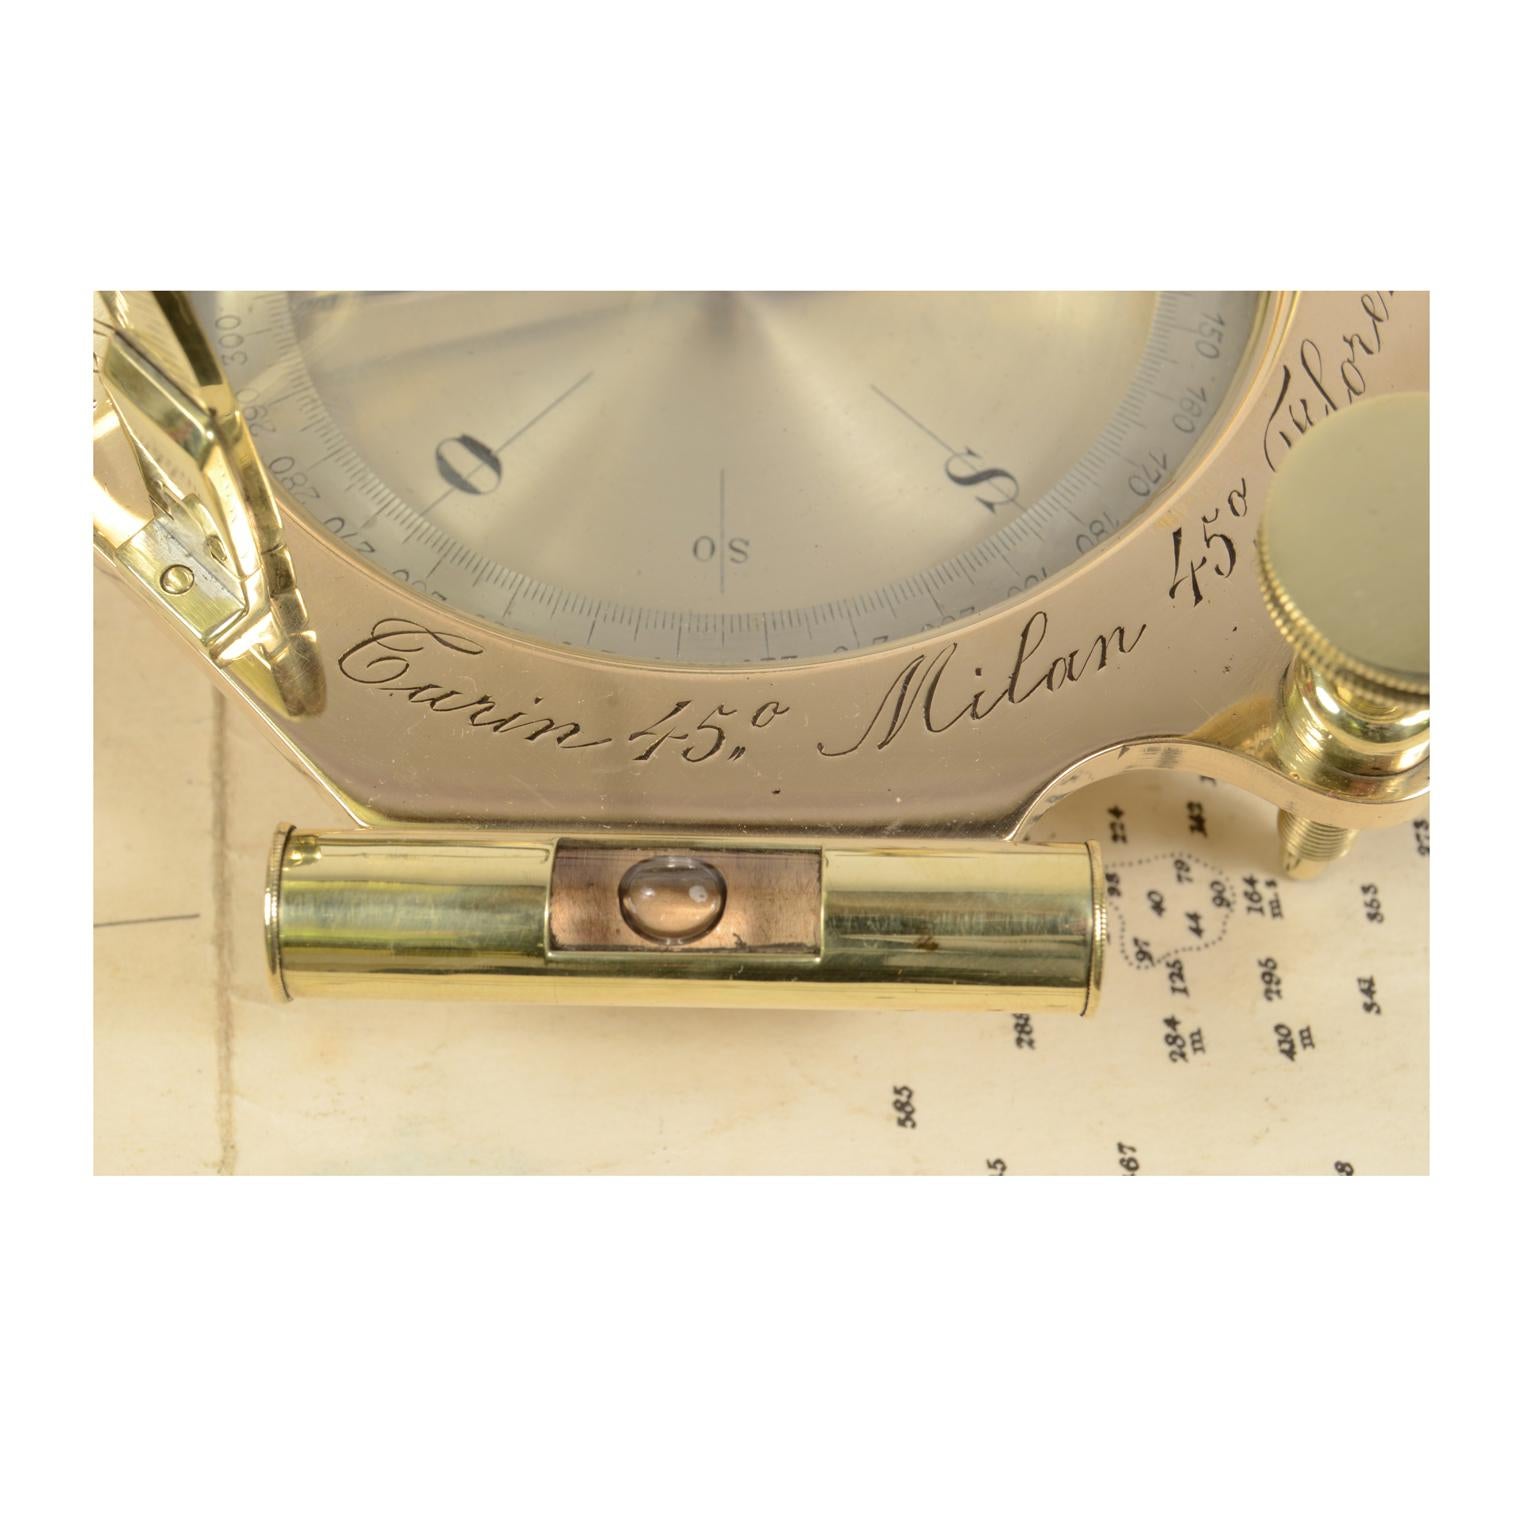 Mid-19th Century Equinoctial Sundial Engraved Brass and Glass Time Measuring Instrument UK 1840